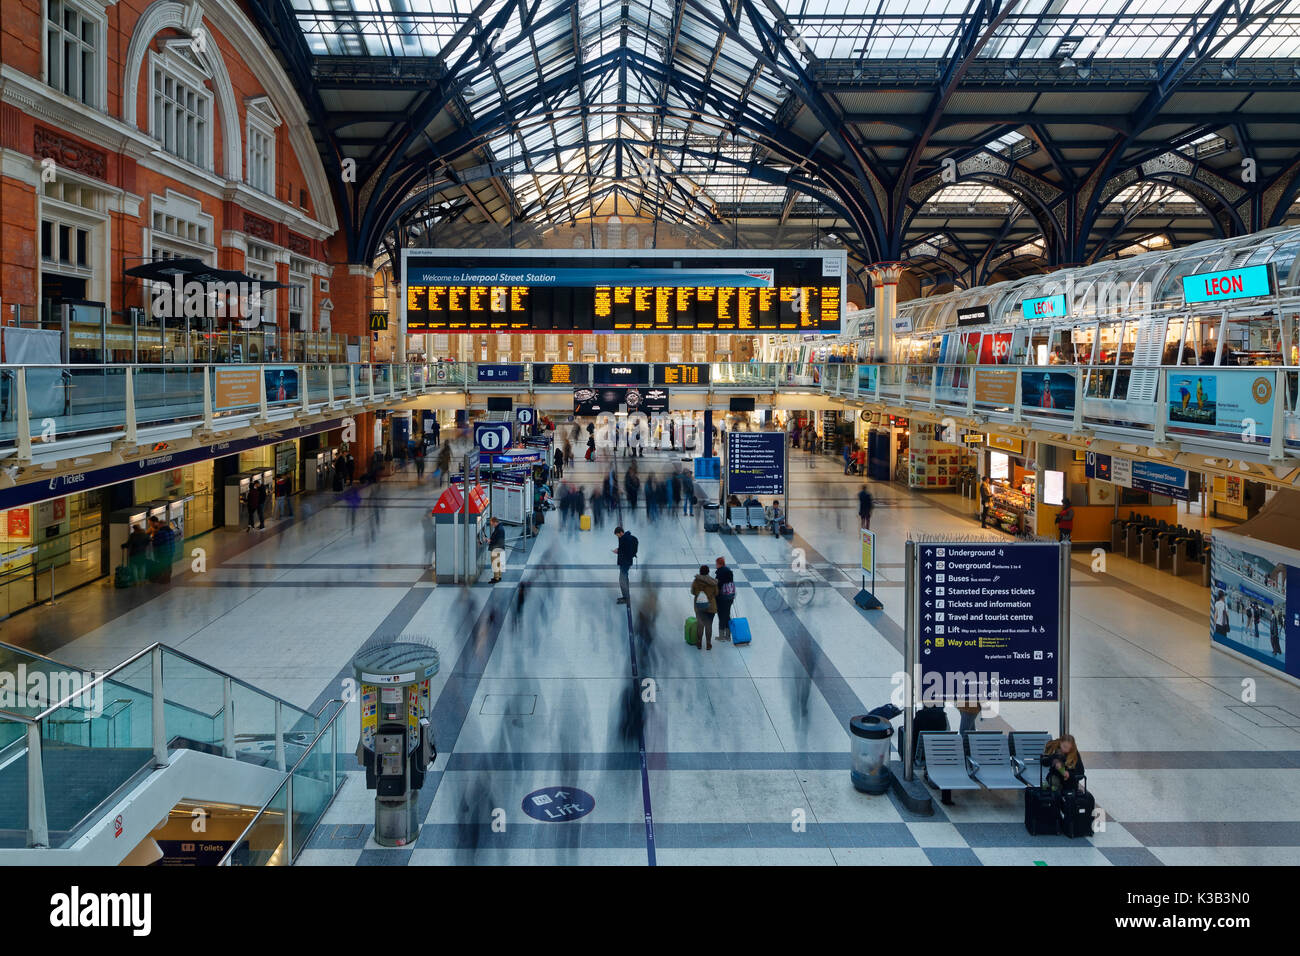 Station concourse, Liverpool Street Station, London, England, Great Britain Stock Photo